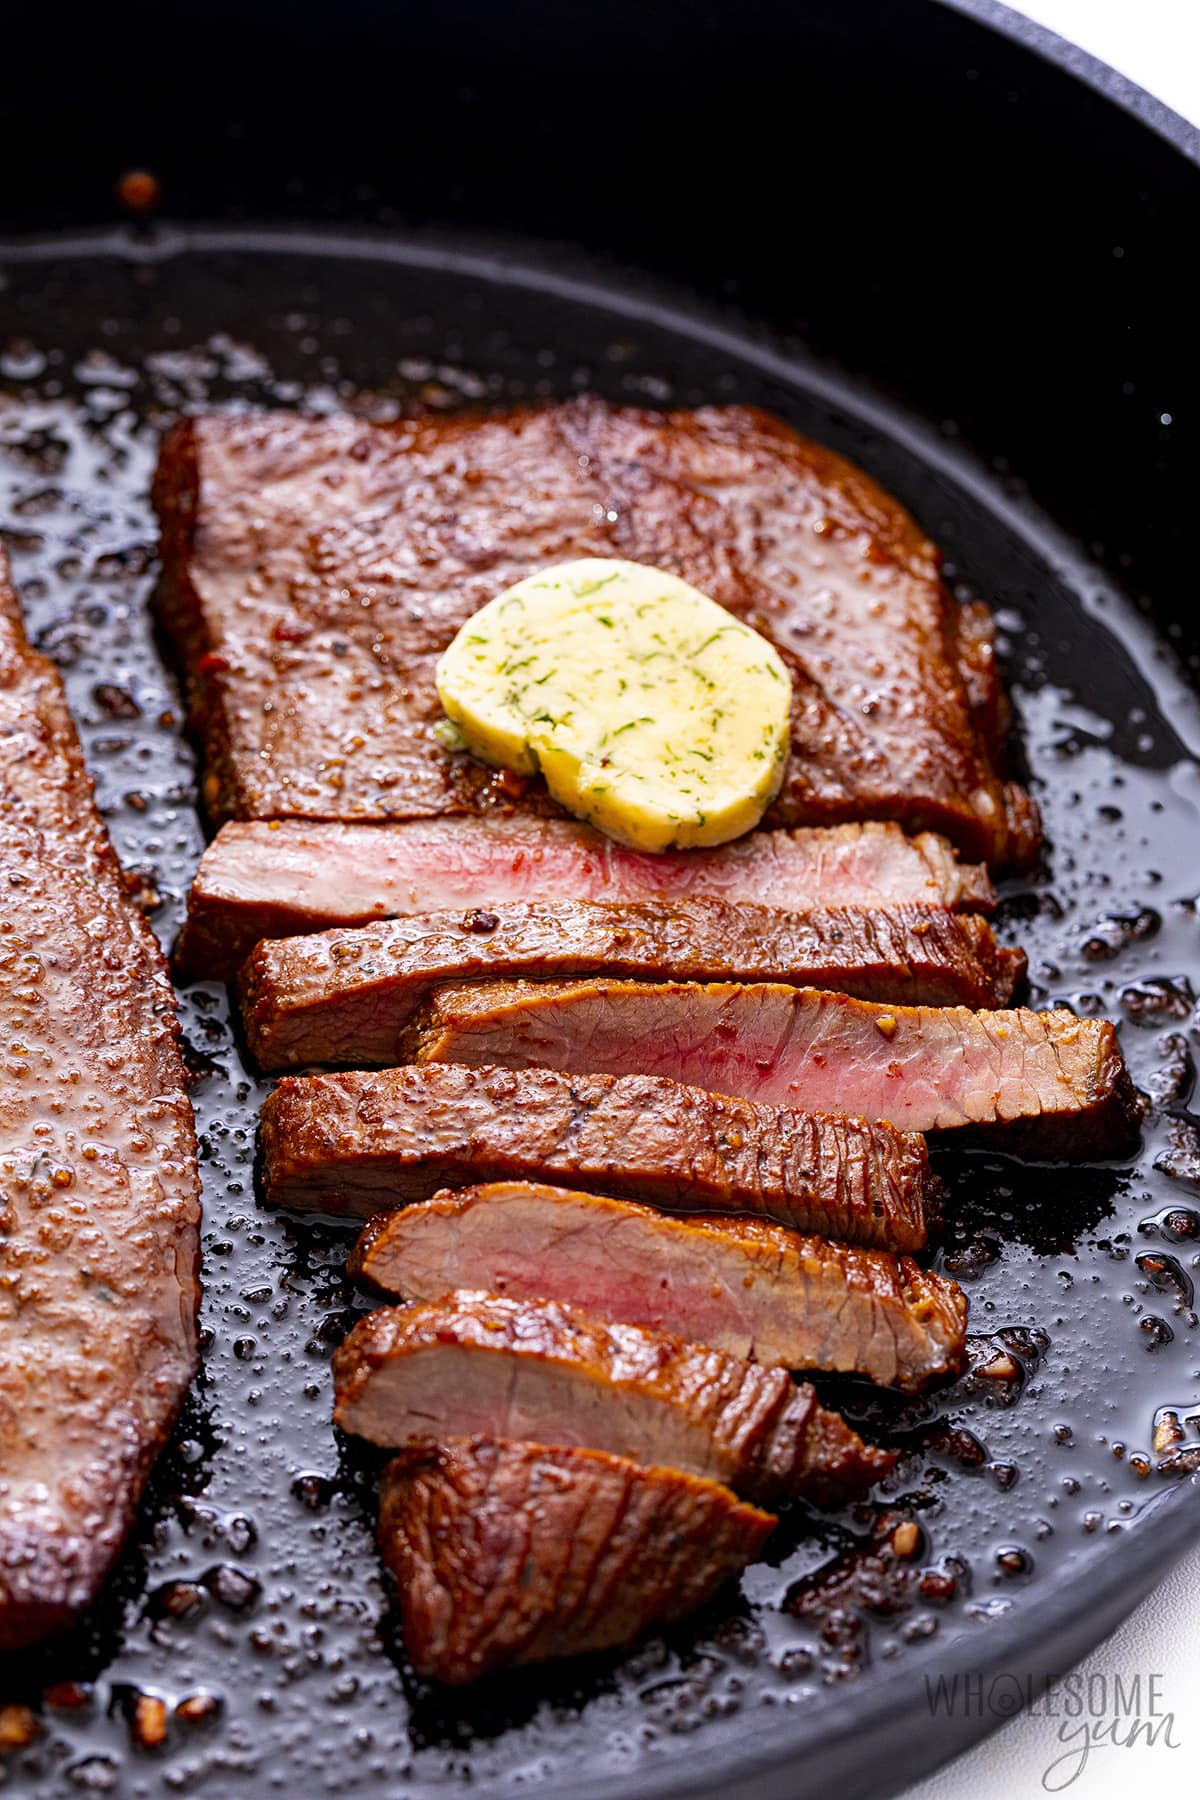 Sirloin tip steak in a pan with compound butter.